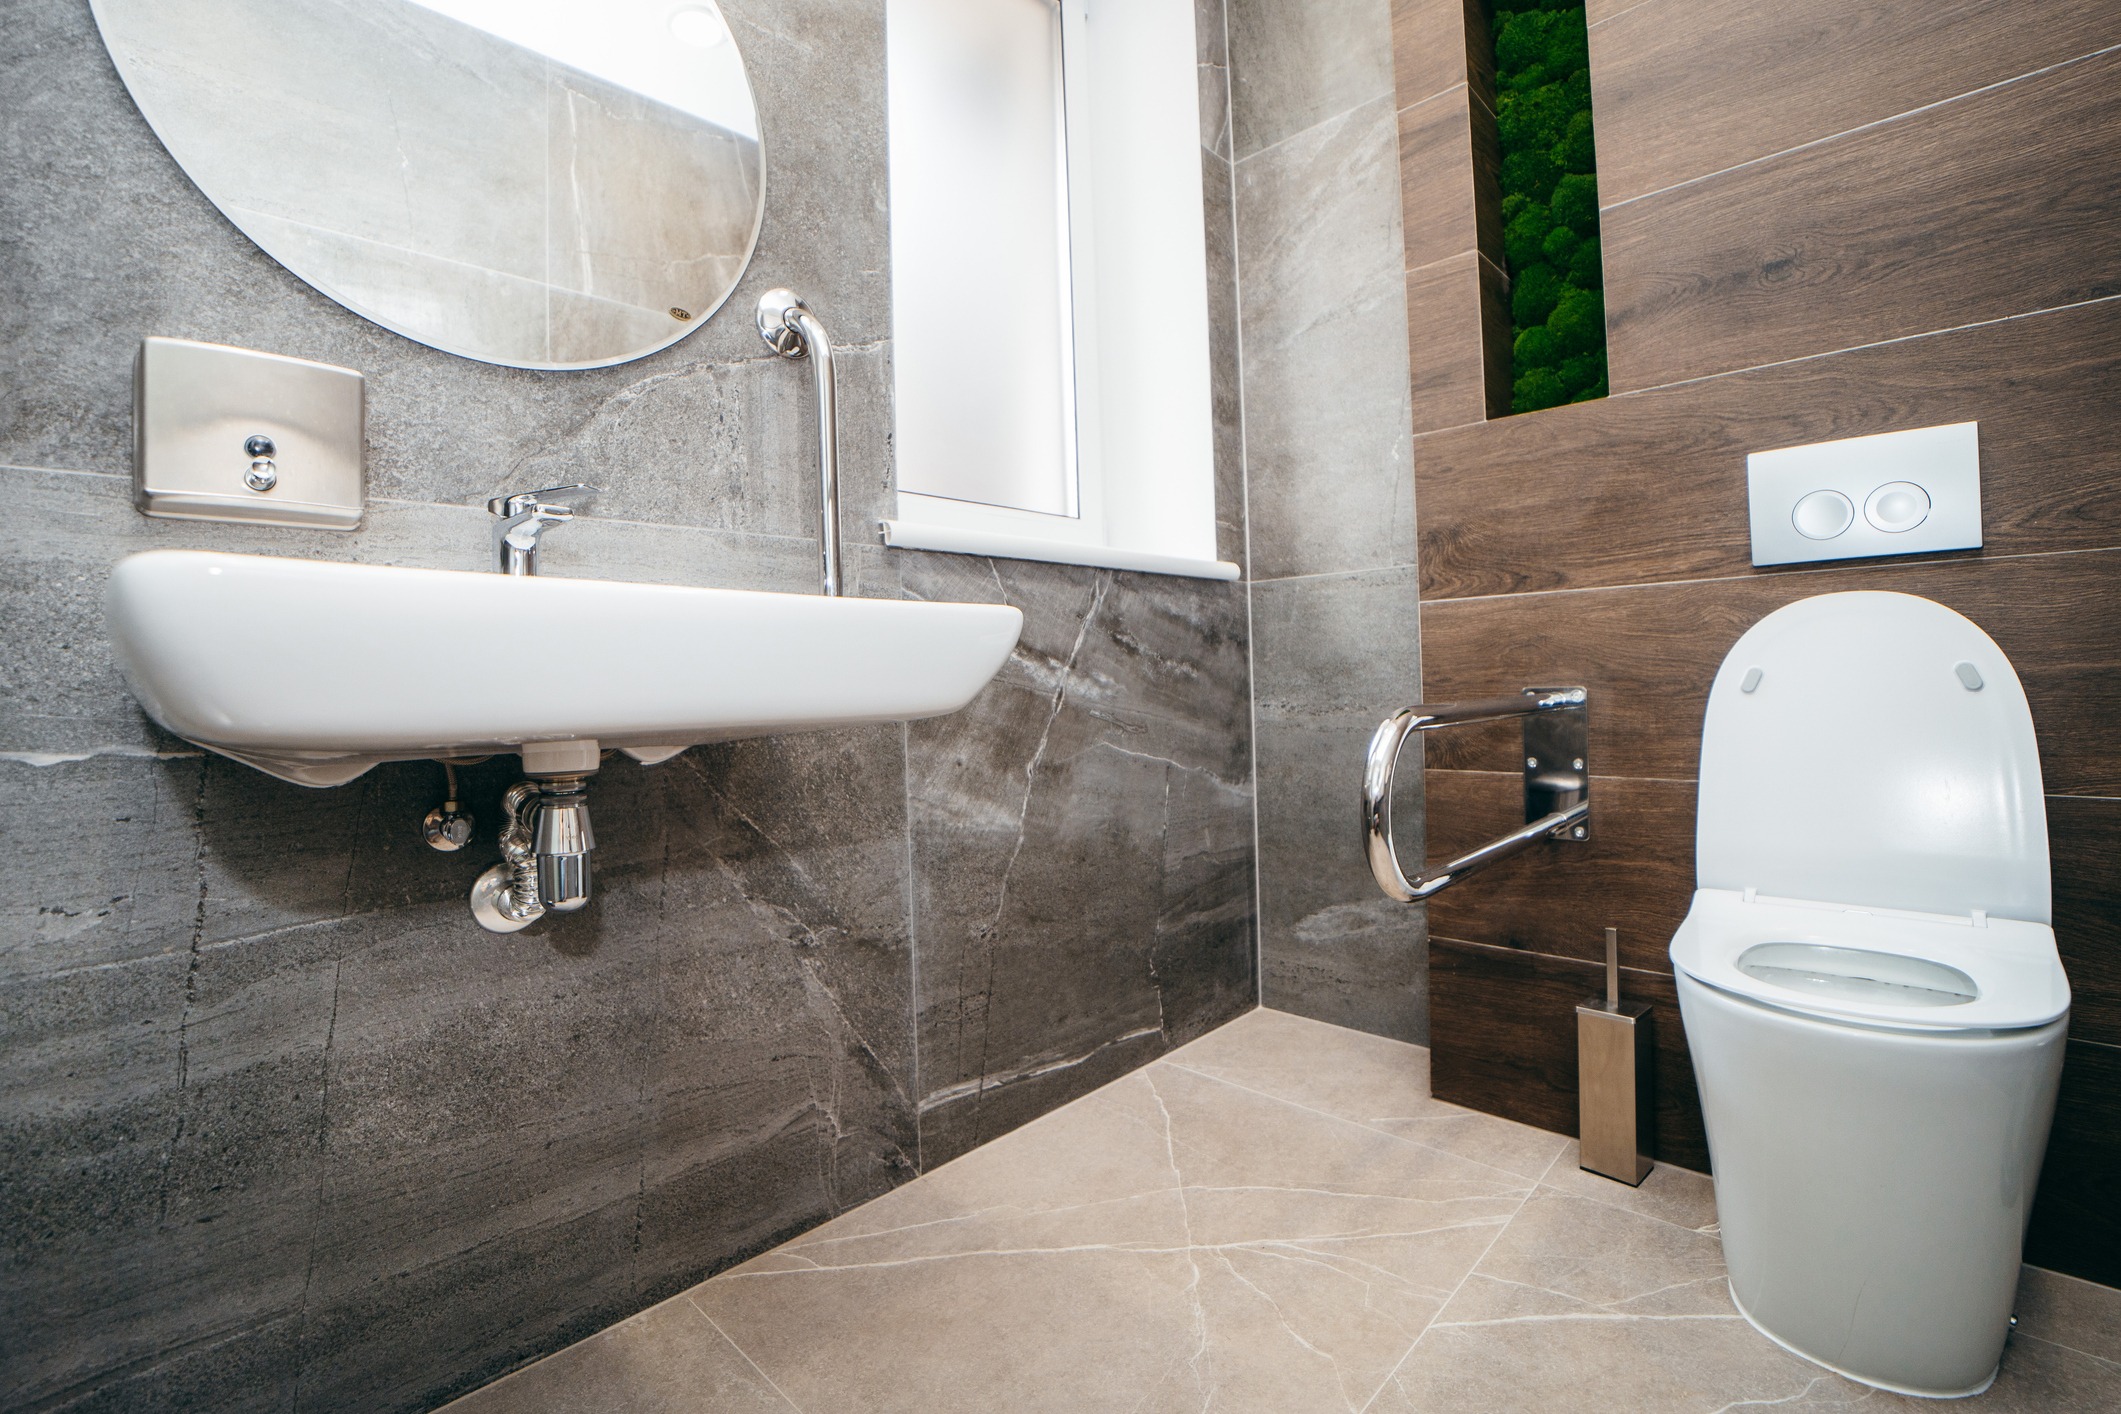 Bathroom Remodeling Ideas That Will Make Your Bathroom More Accessible